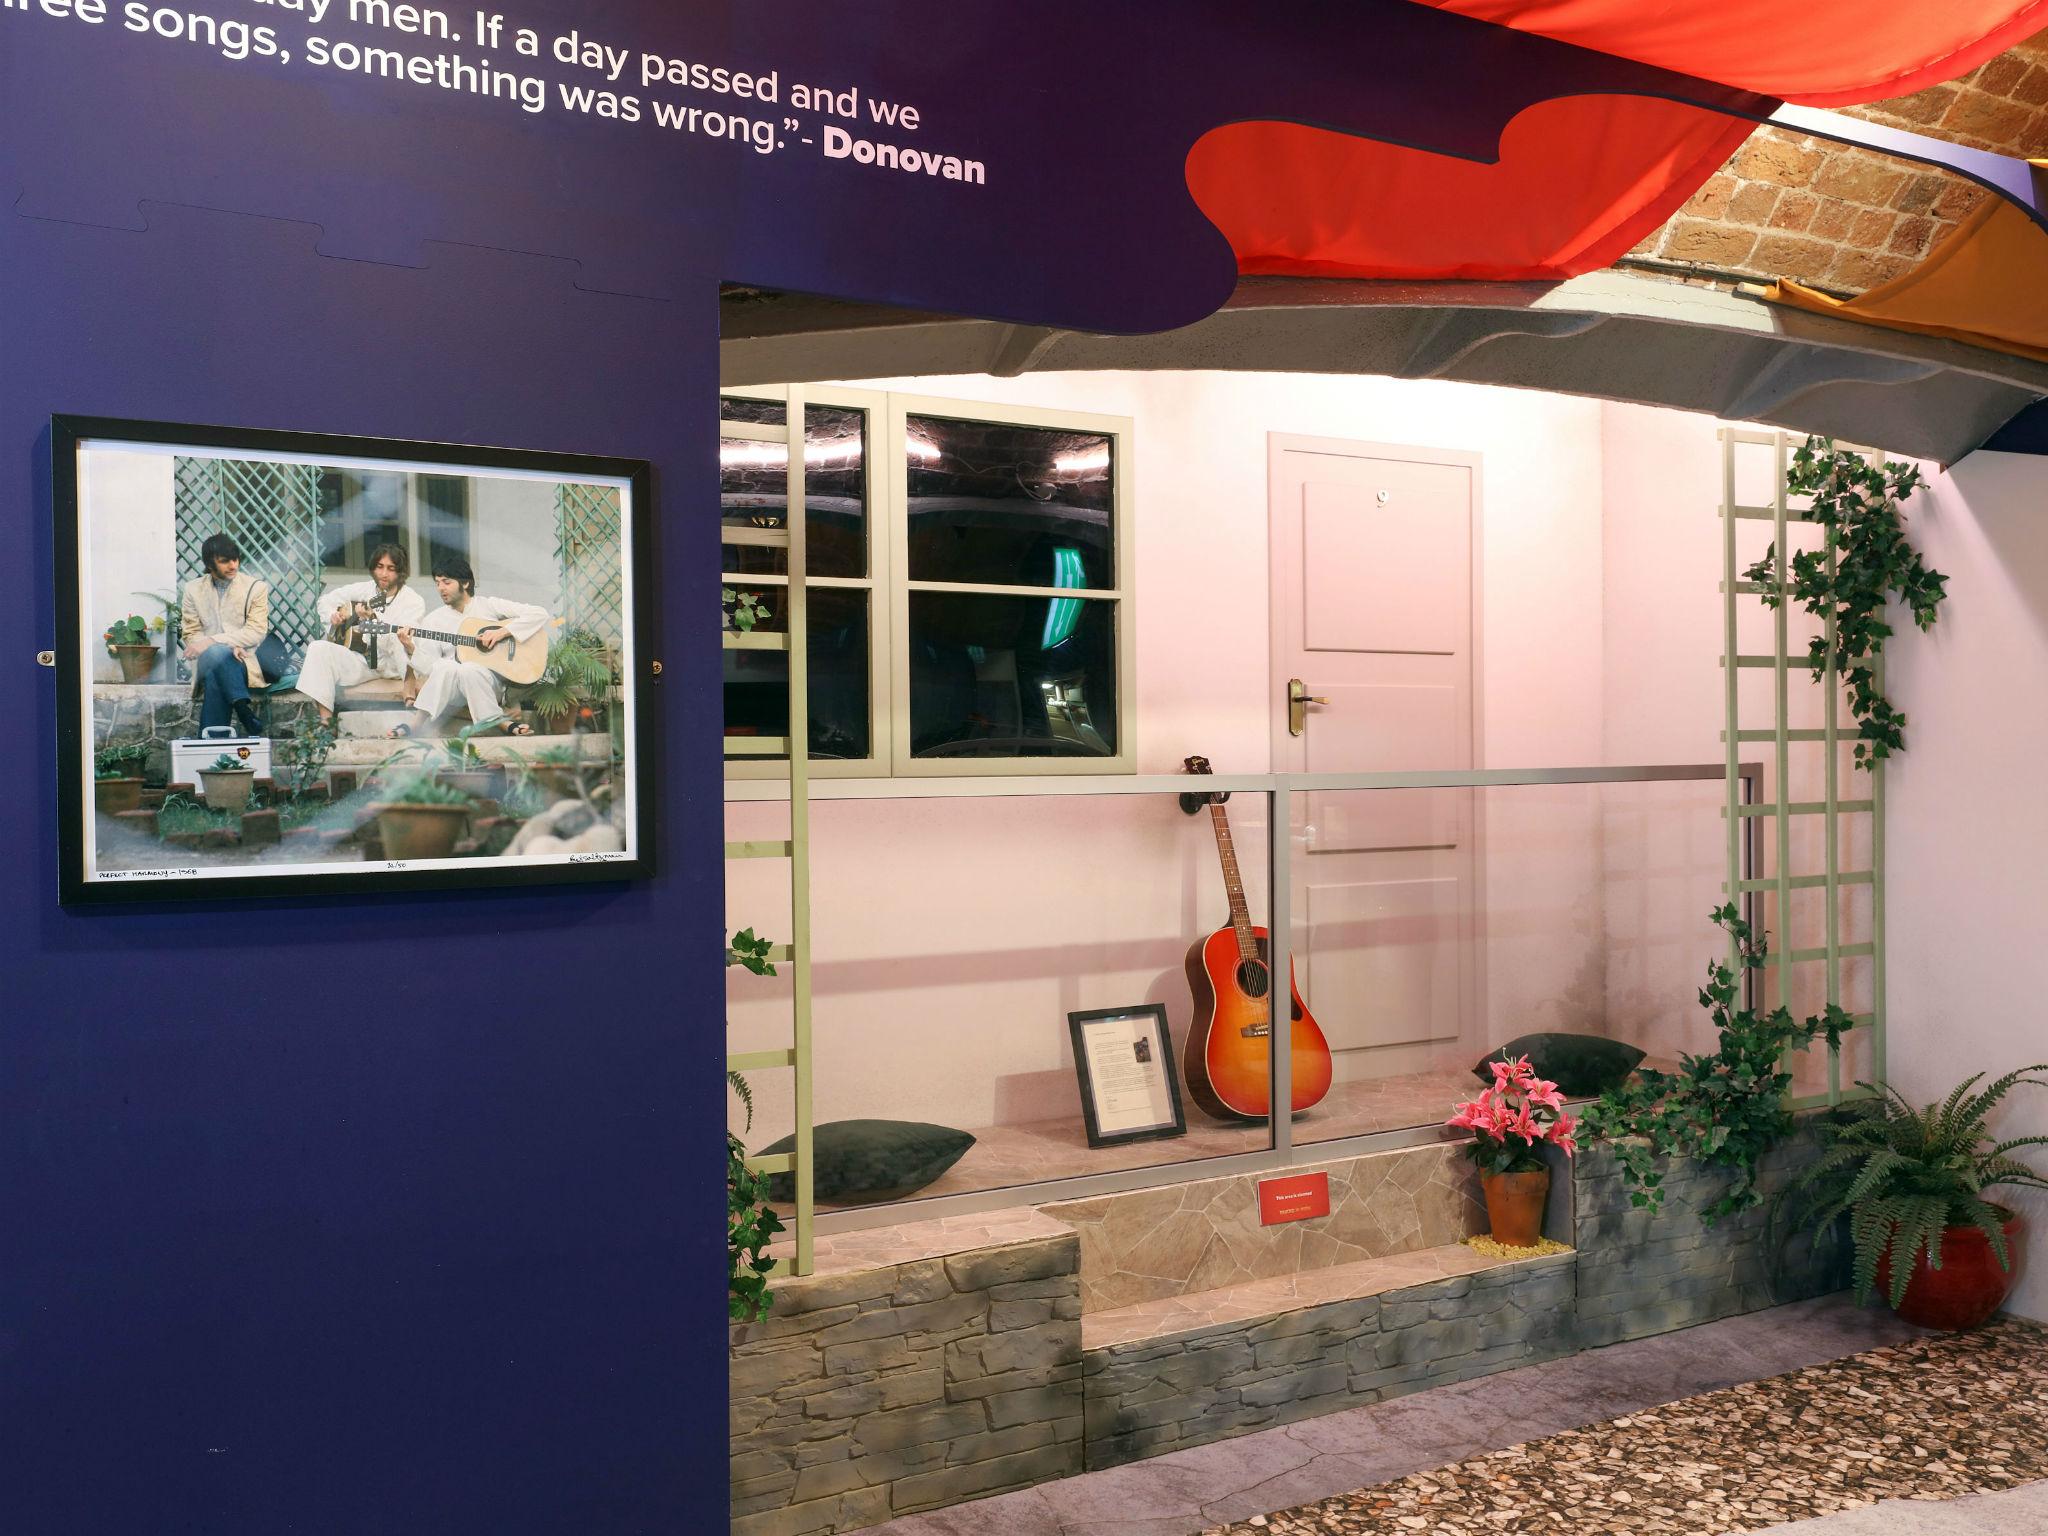 A reconstruction of John Lennon’s No 9 bungalow with Donovan’s guitar outside at the Beatles in India exhibition